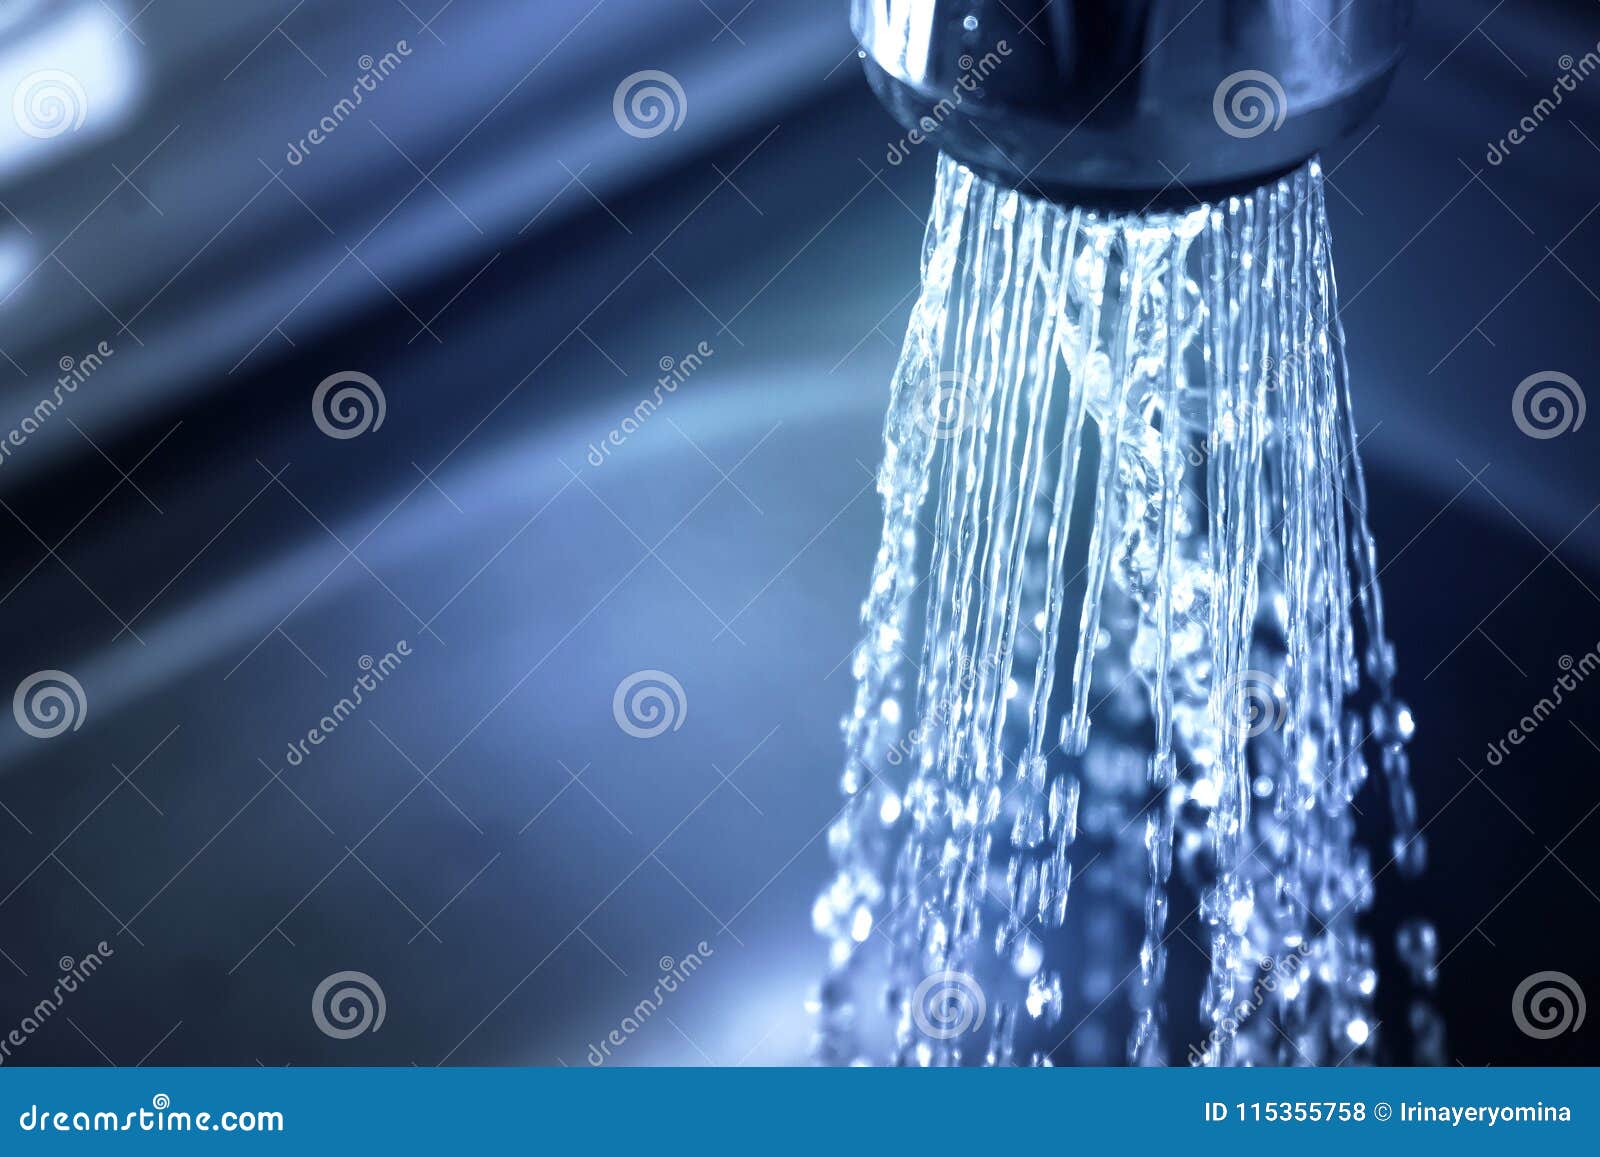 concept water saving at home, reducing use. water supply problem